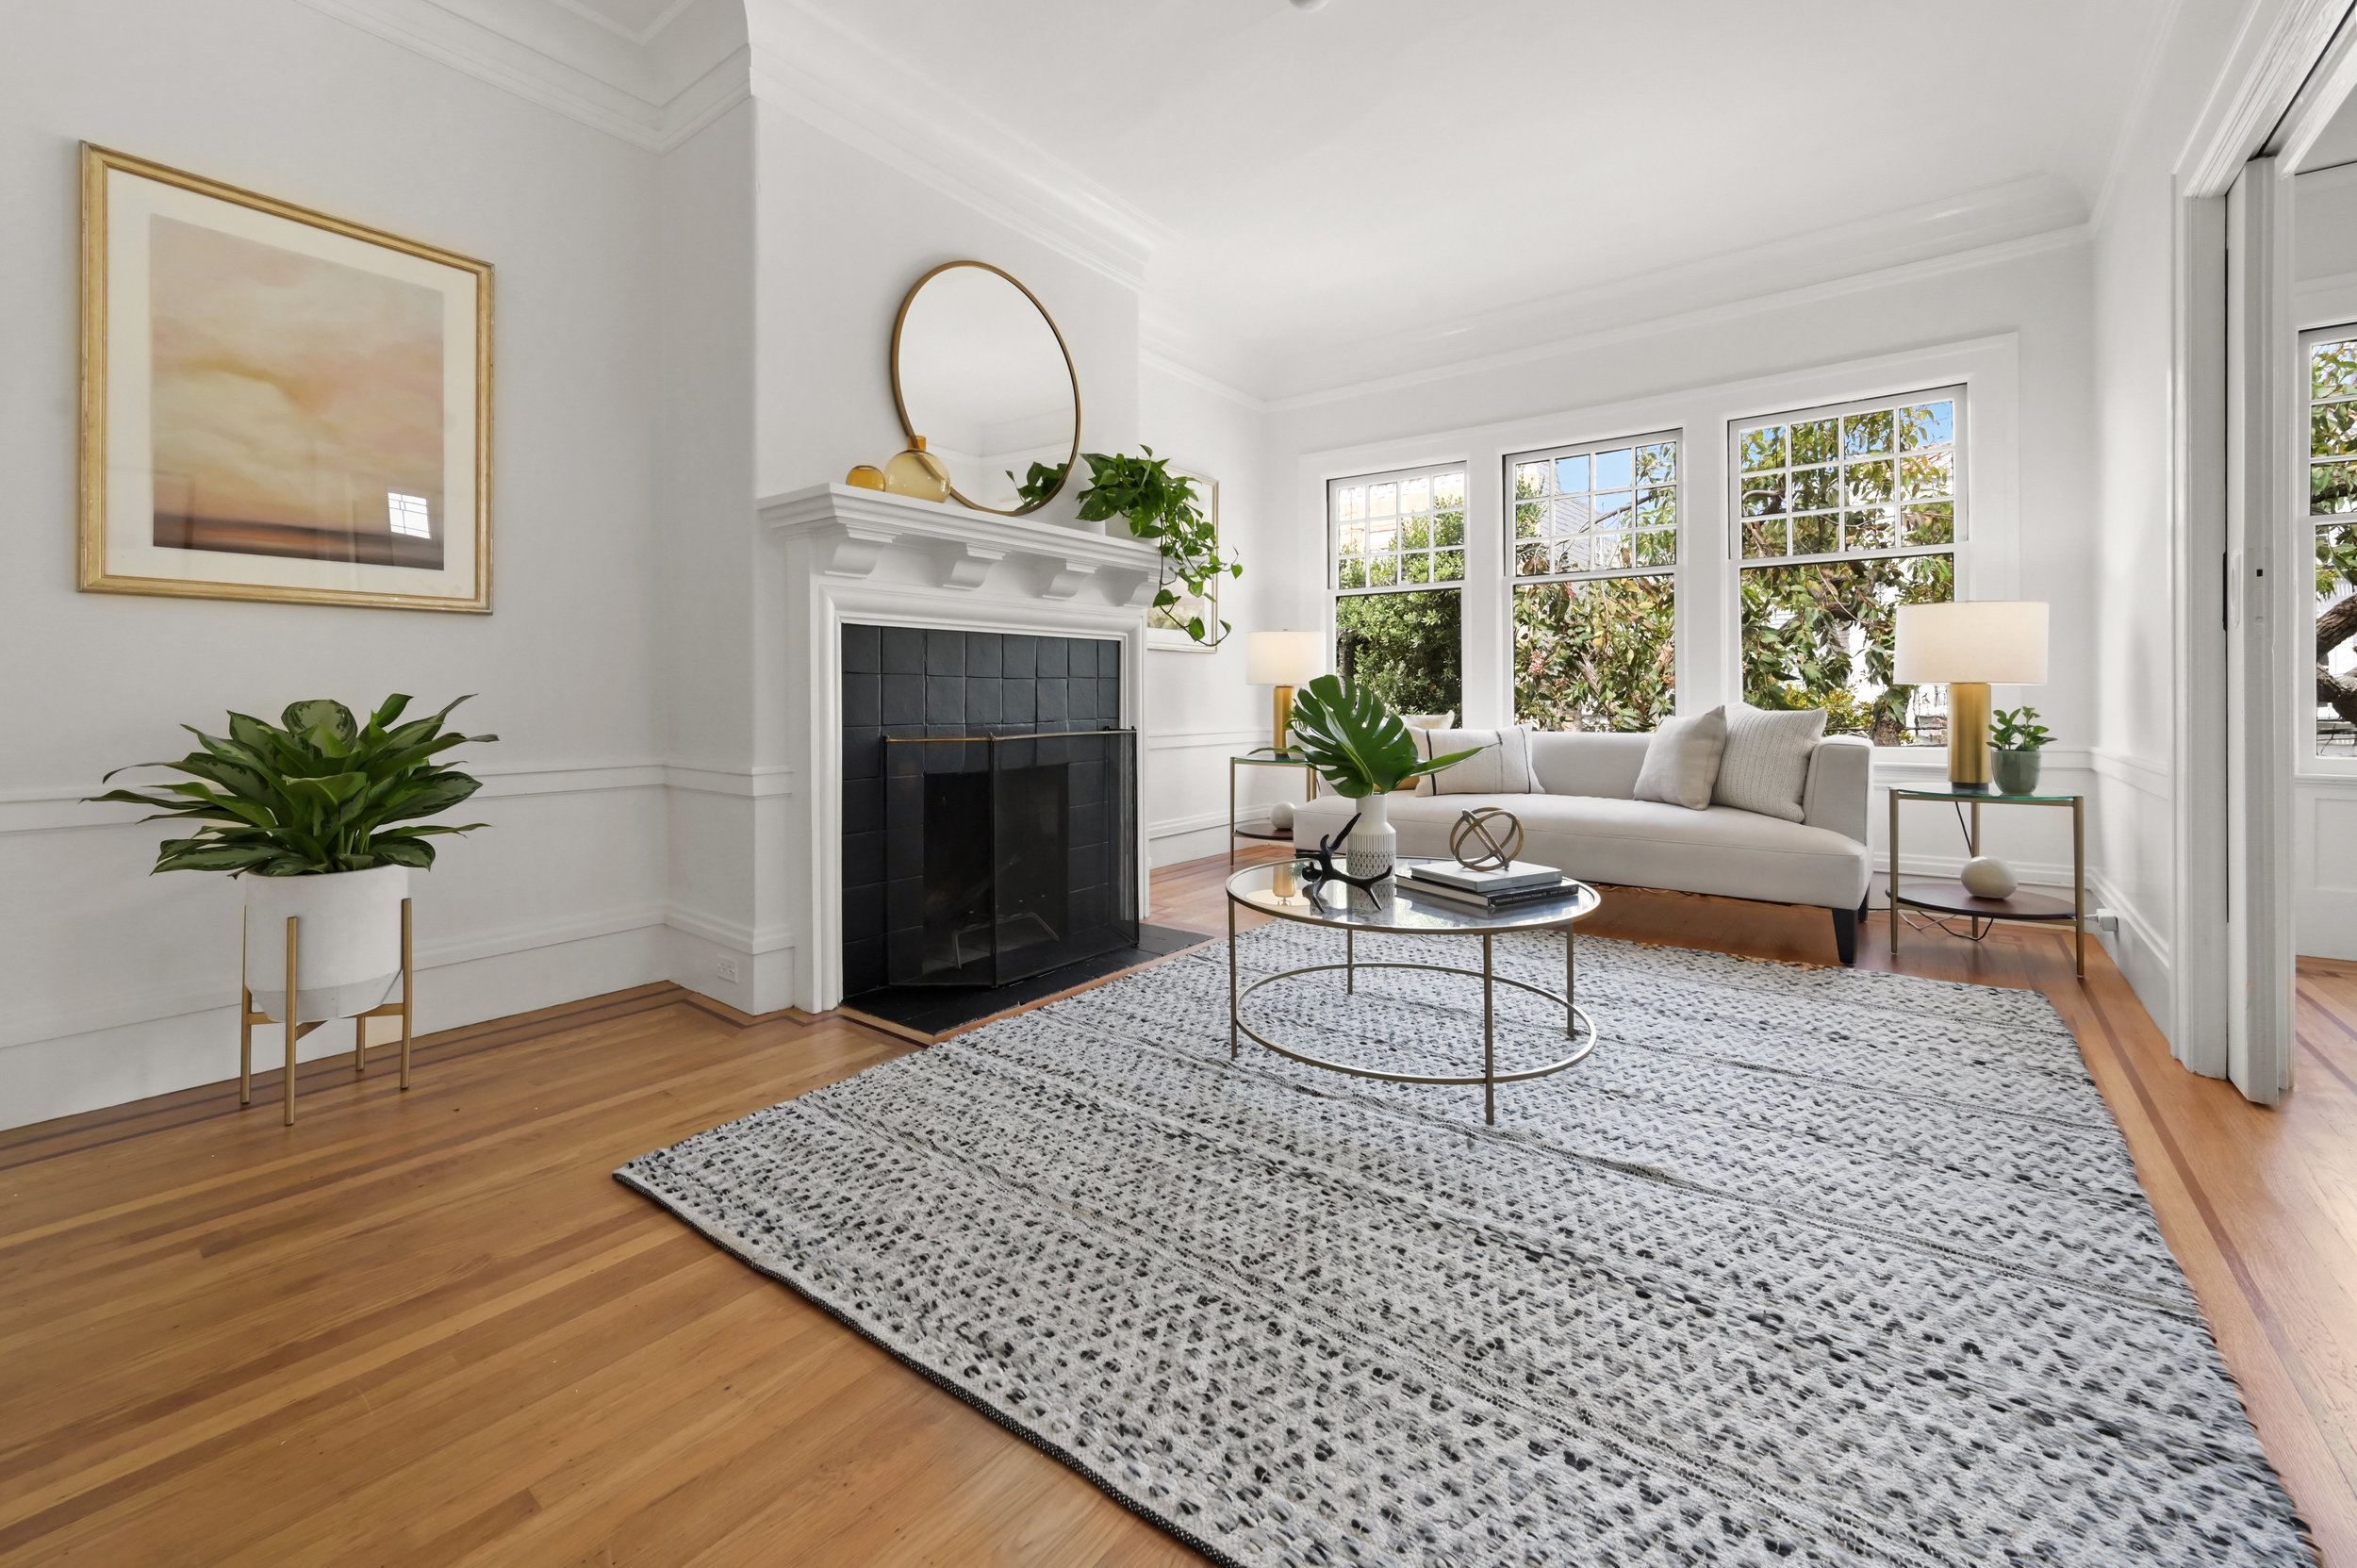 Property Photo: Living room featuring a fireplace and wood floors